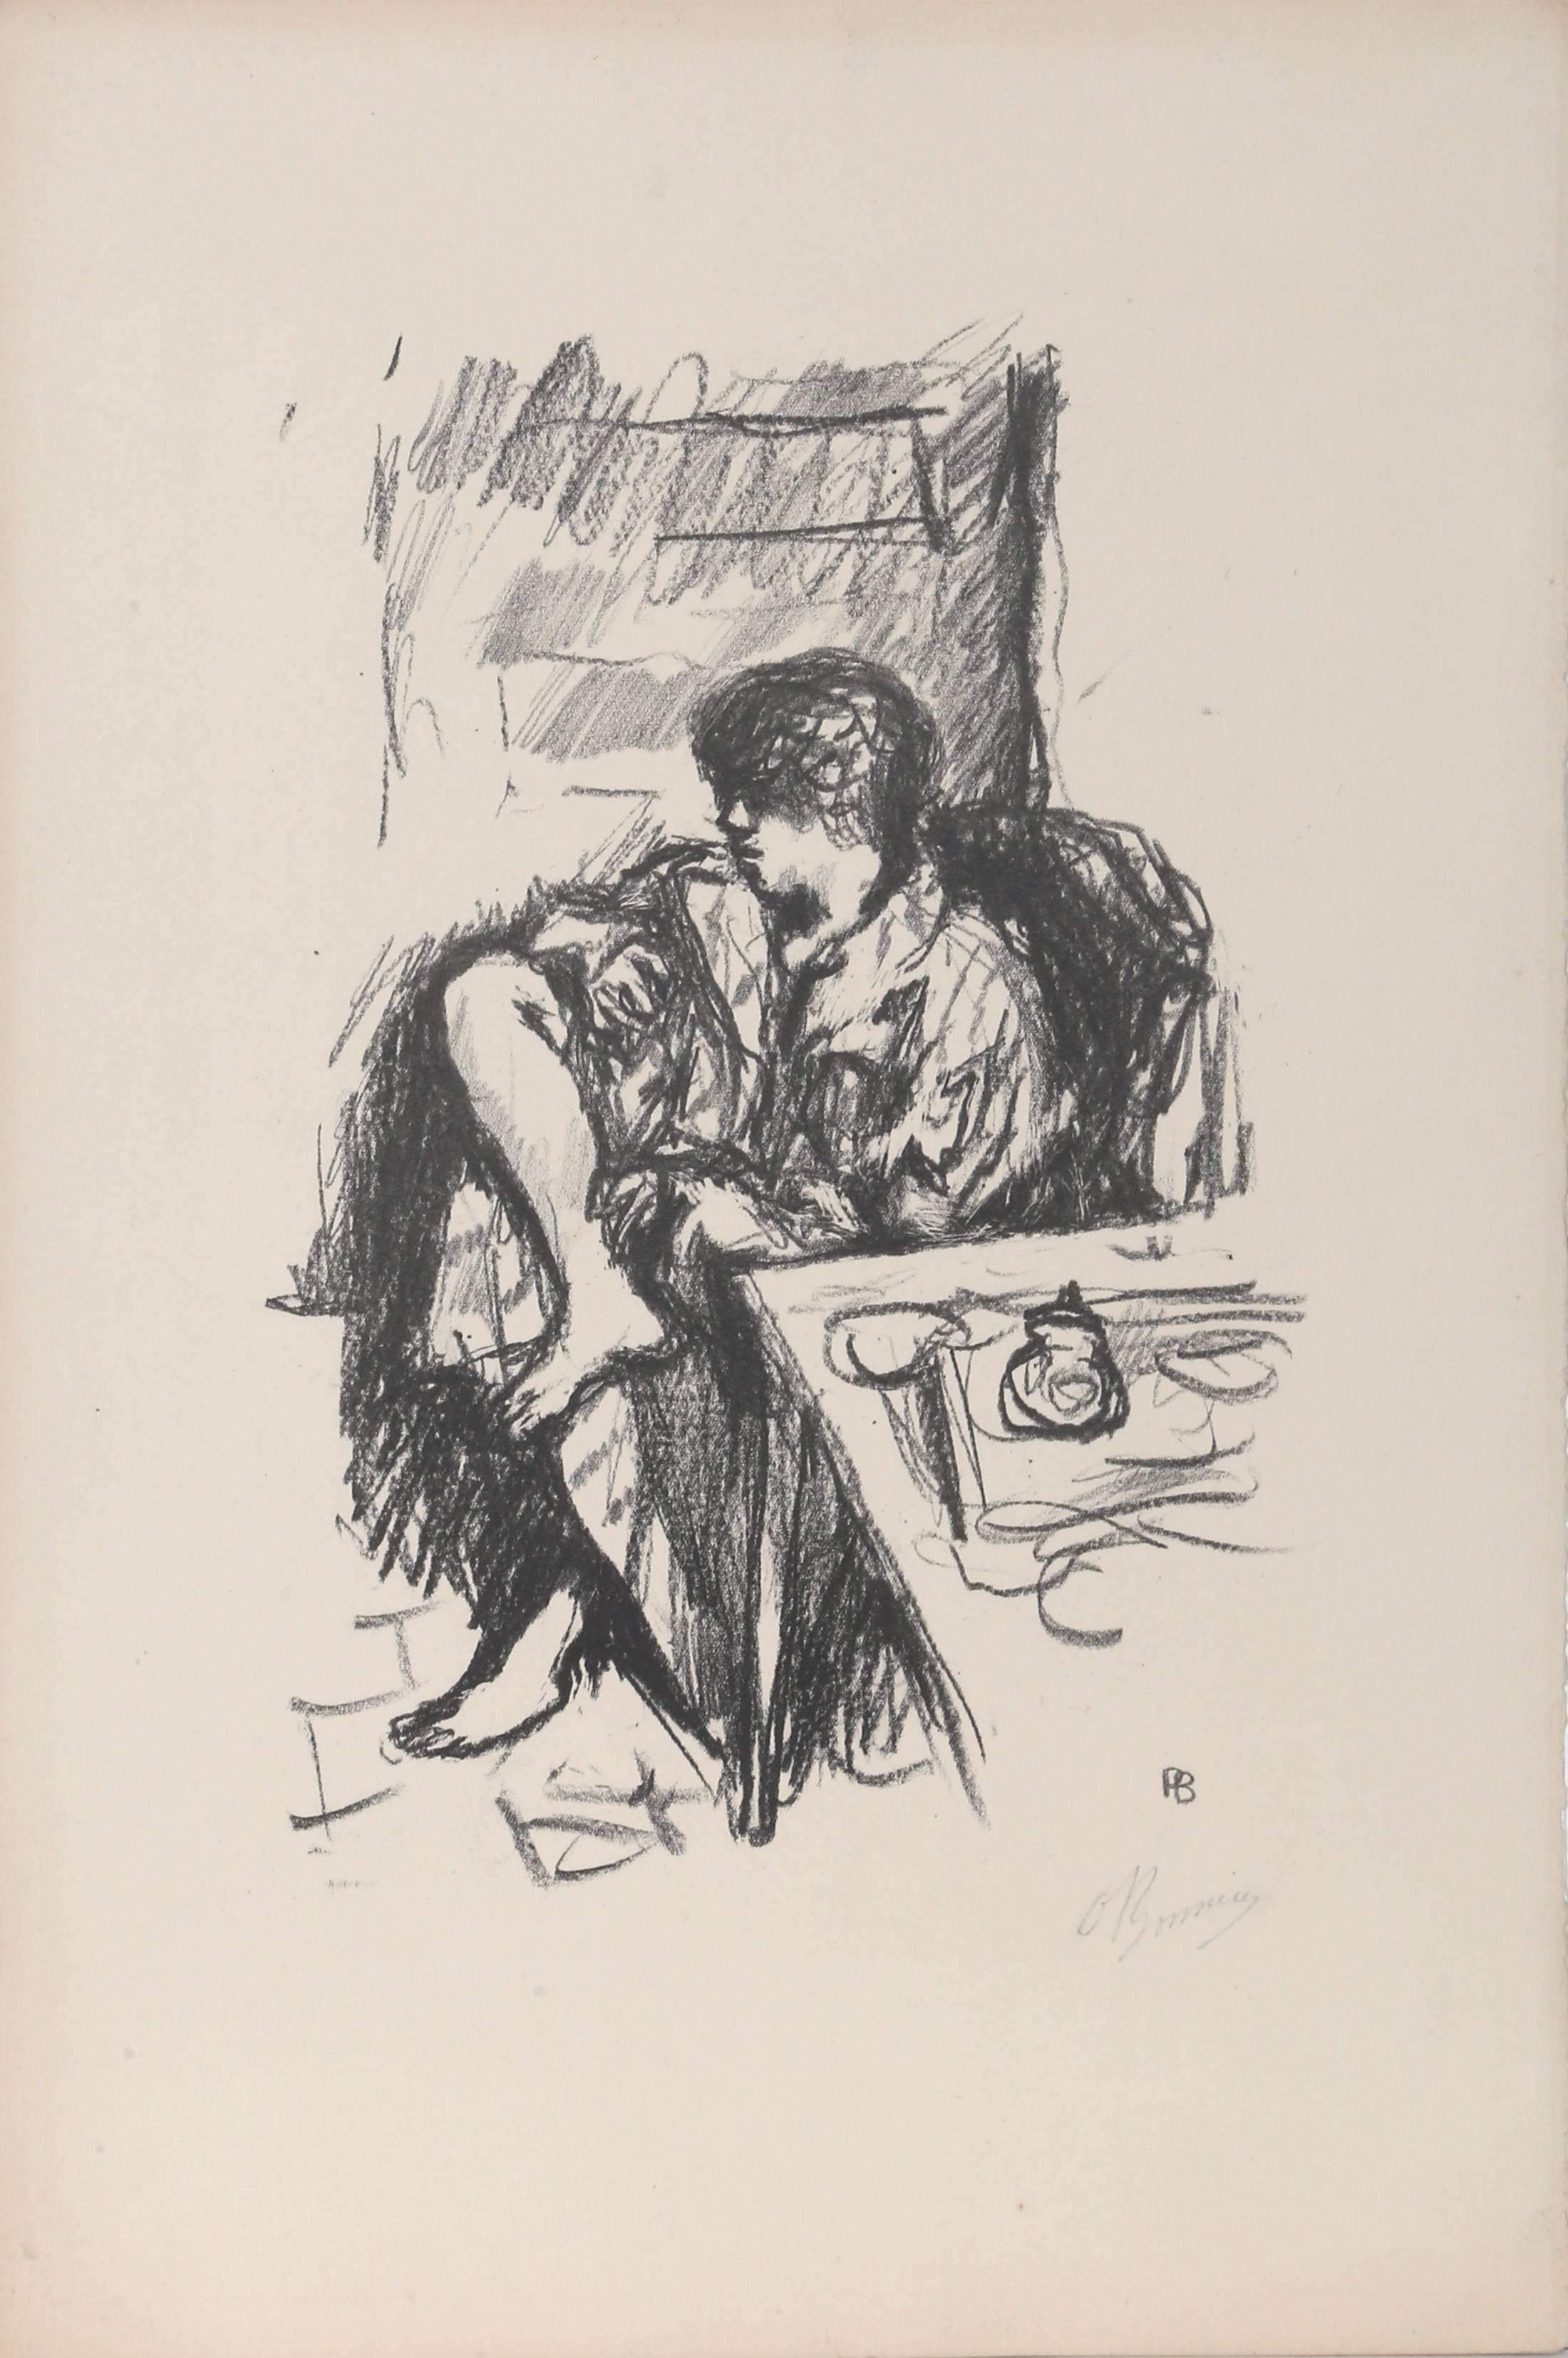 Artist: Pierre Bonnard, French (1867 - 1947)
Title: La Toilette Assise
Year: 1925
Medium: Lithograph, signed 'PB' in the plate, signed 'P. Bonnard' lower right and numbered lower left (not visible) in pencil
Edition: 100
Image Size: 13 x 8.5